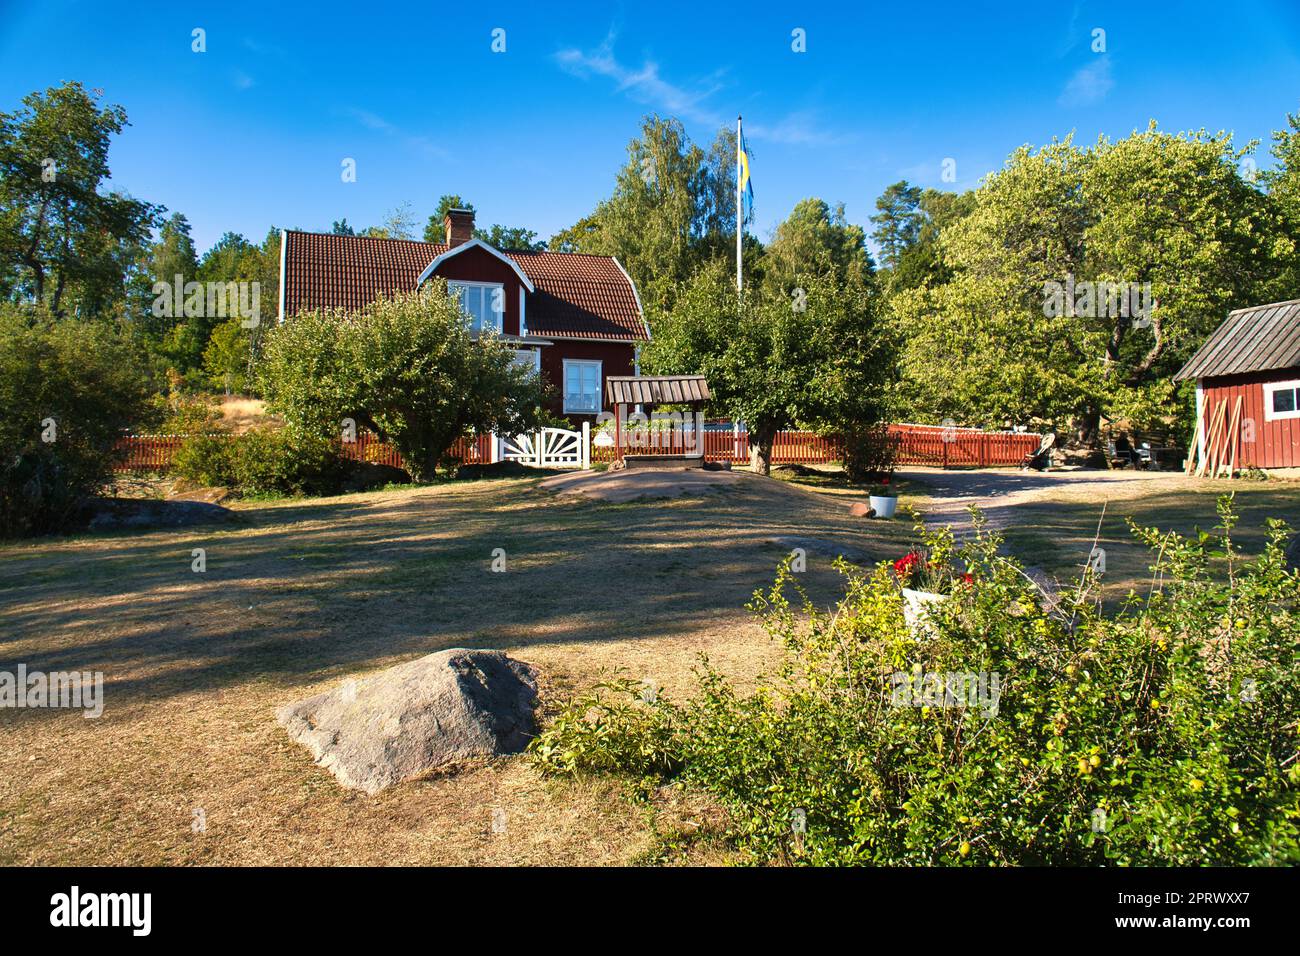 Swedish red and white traditional house in Smalland, White fence green garden blue sky Stock Photo